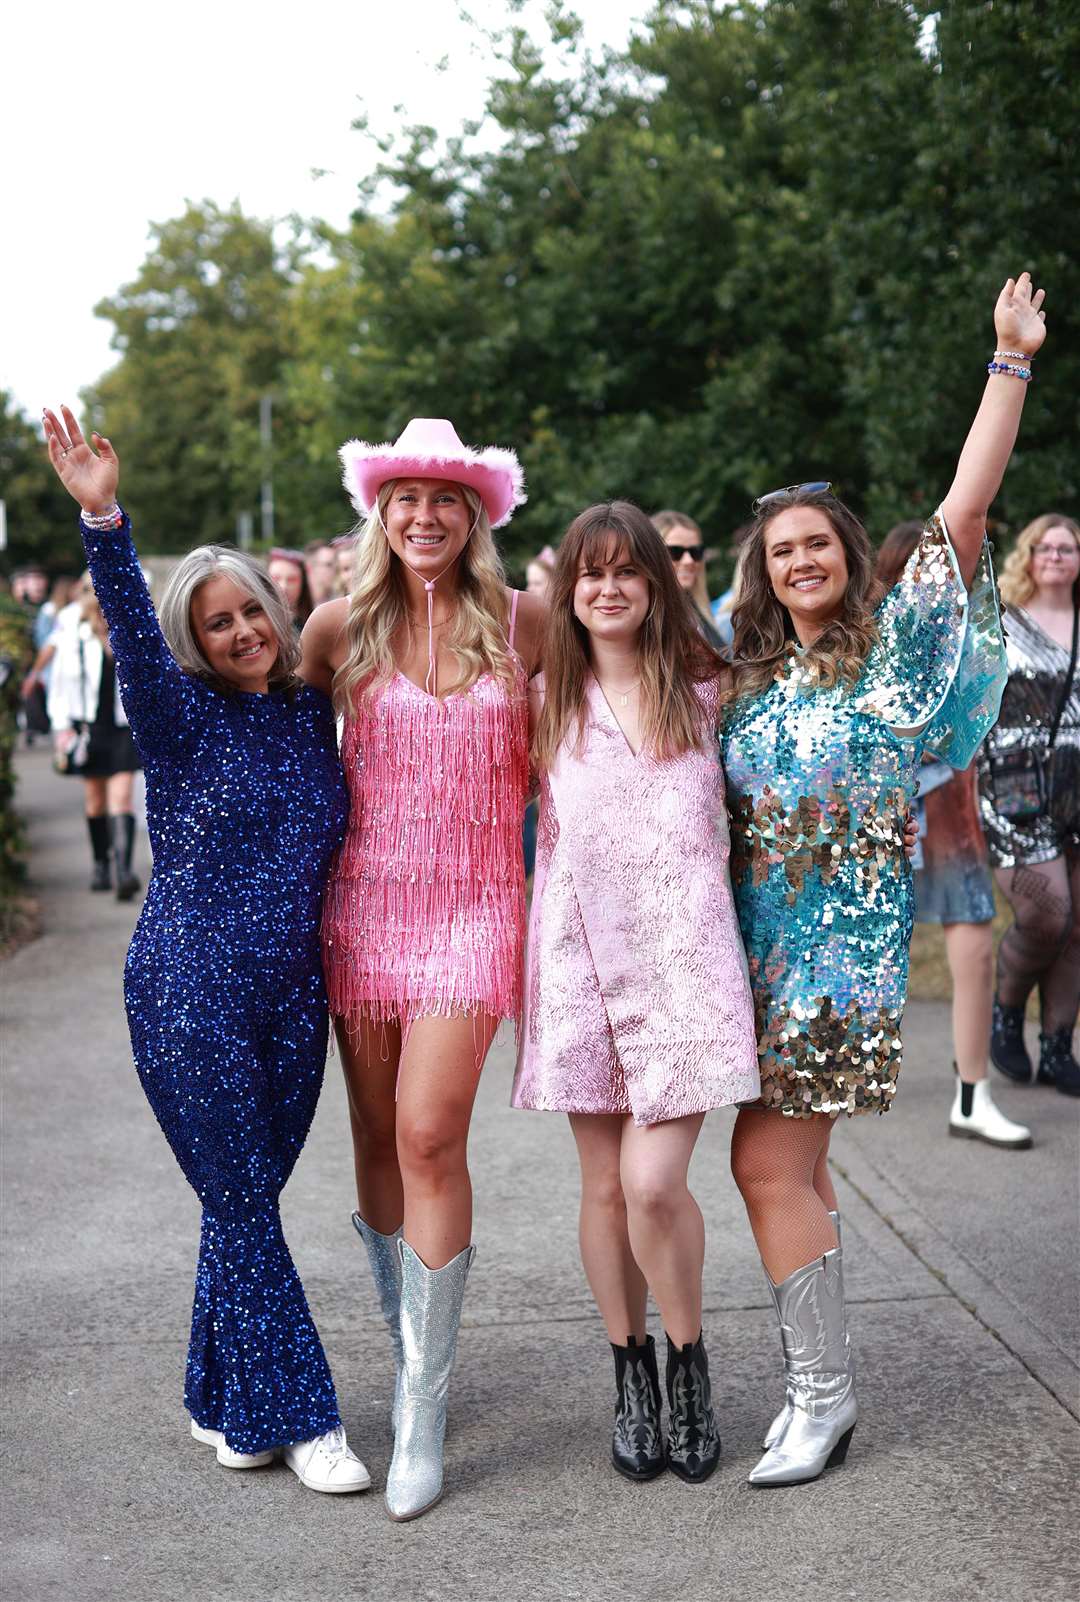 (Left to right) Emma Satchwell, Lauren Clark, Annabel Cleary, and Tierna Brazil before watching Taylor Swift performing on stage at the Aviva Stadium in Dublin (Liam McBurney/PA)